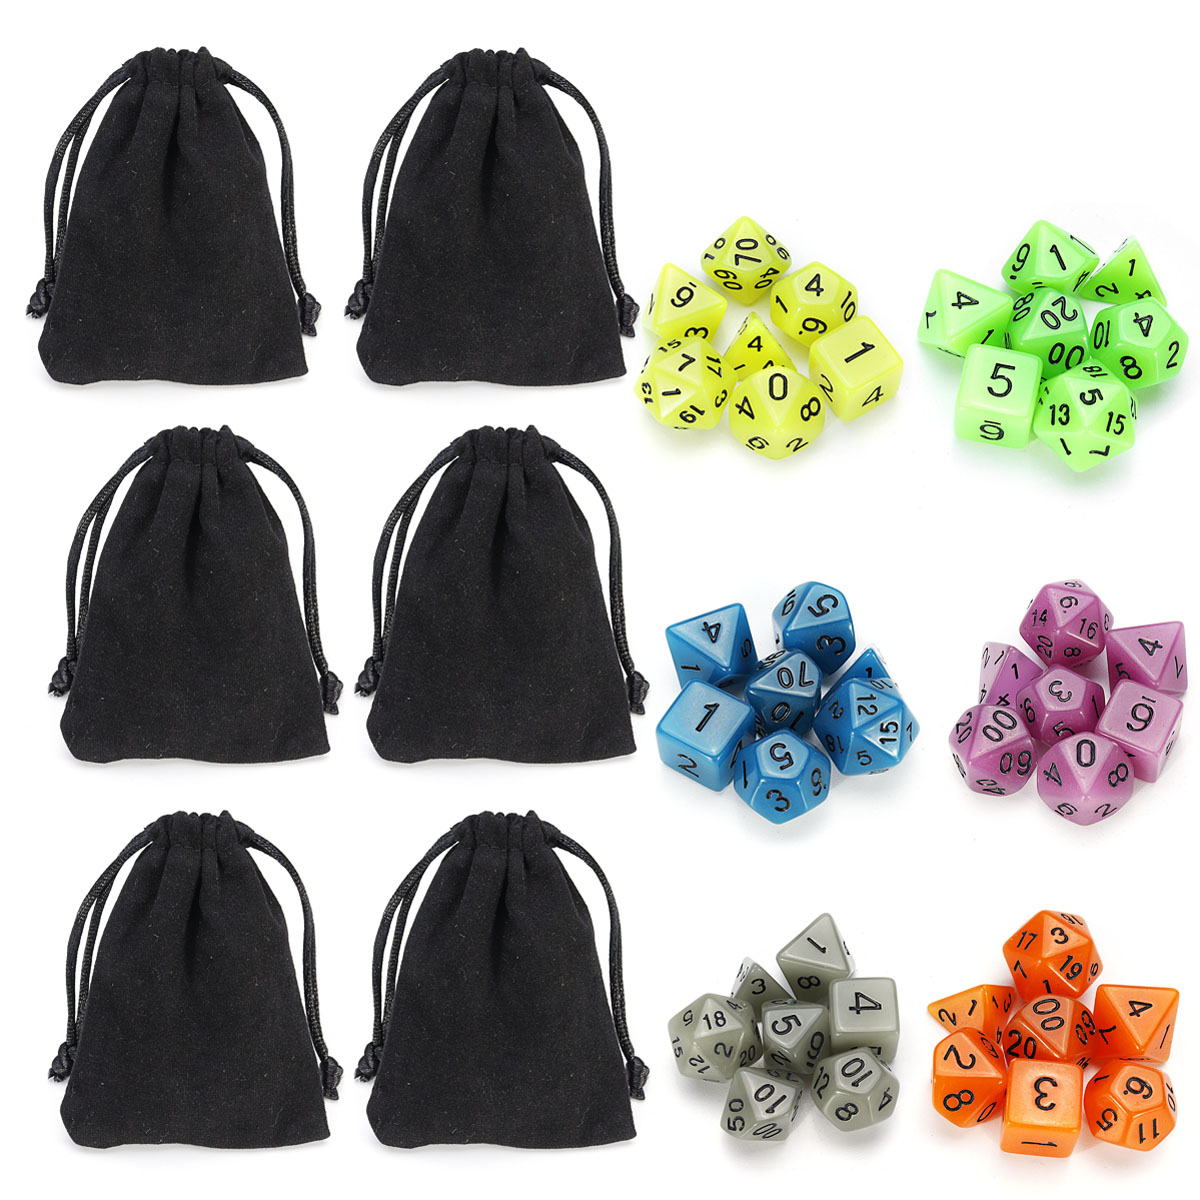 7-Pcs-Luminous-Polyhedral-Dices-Multi-sided-Dice-Set-Polyhedral-Dices-With-Dice-Cup-RPG-Gadget-1422236-5